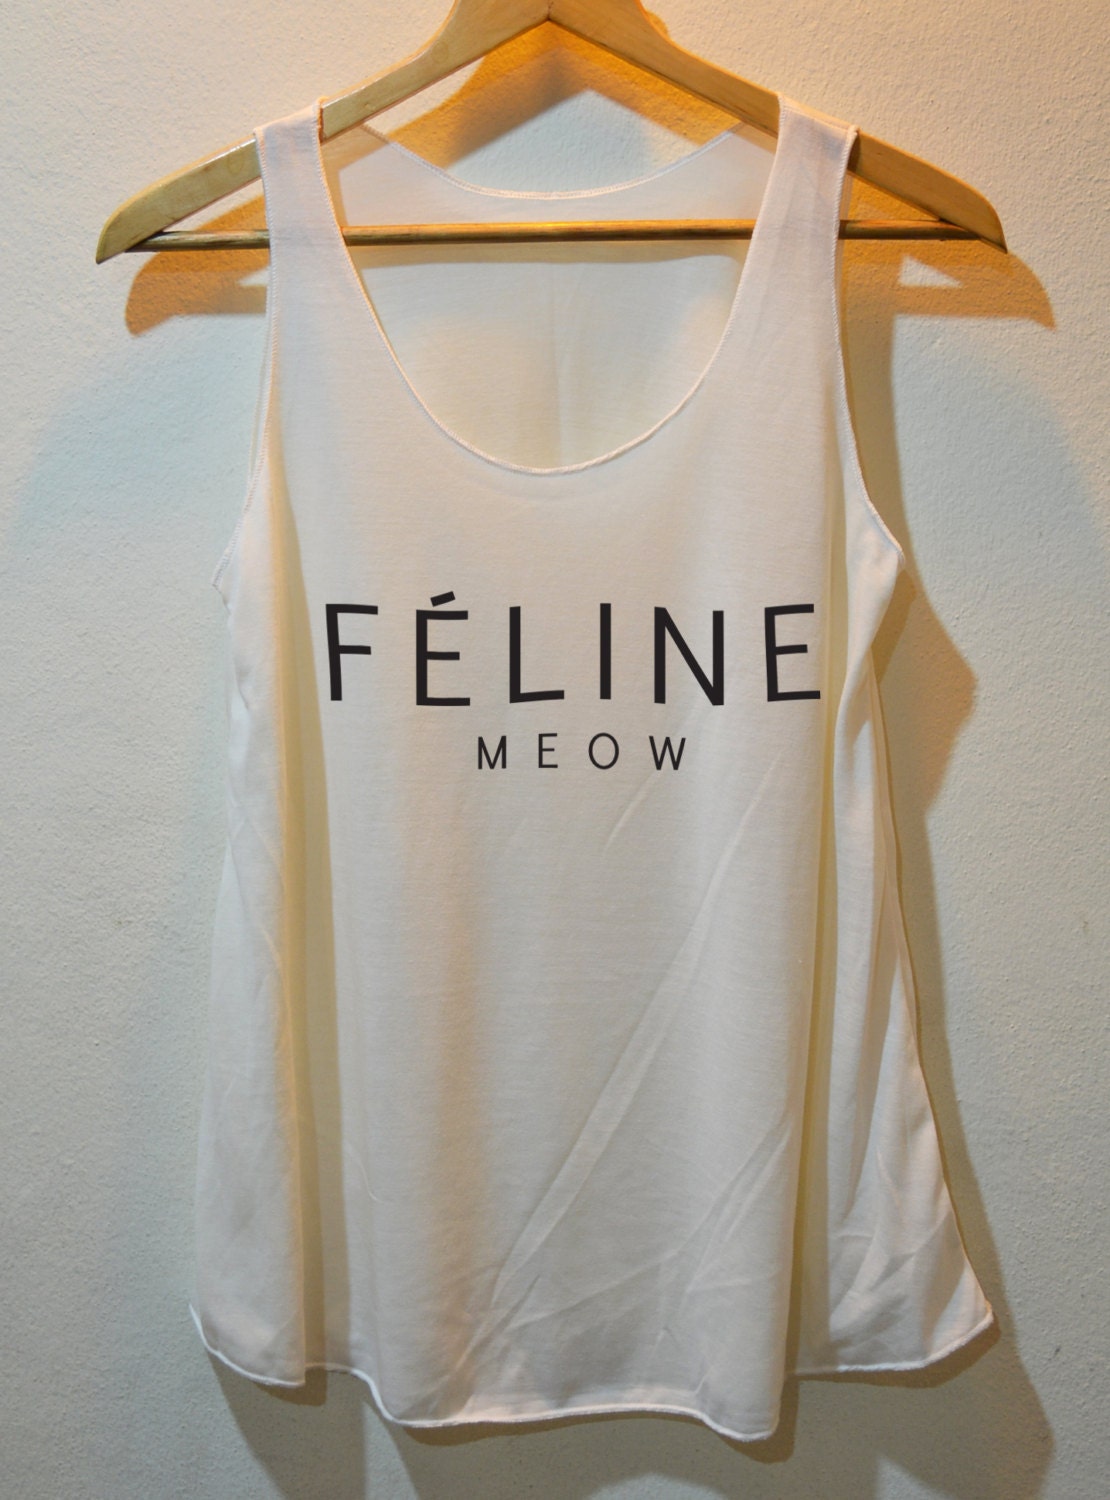 Feline Meow Inspired printed Shirt Tank Top Vest Ladies Small Large